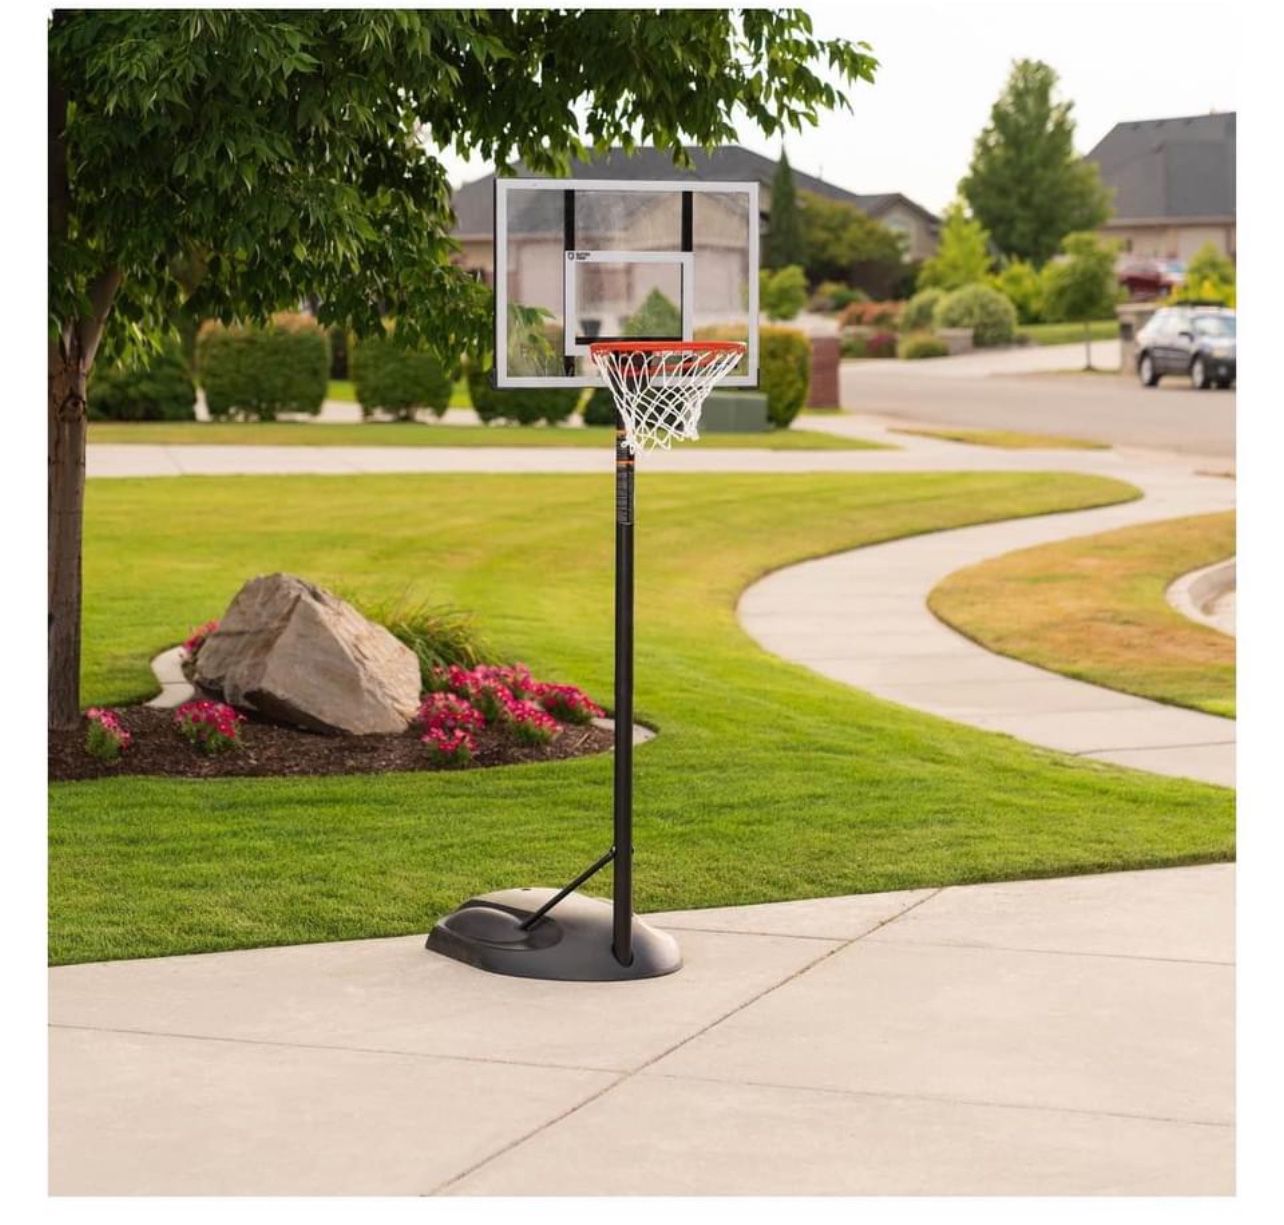 Adjustable Youth Portable Basketball Hoop, 30 inch Polycarbonate 